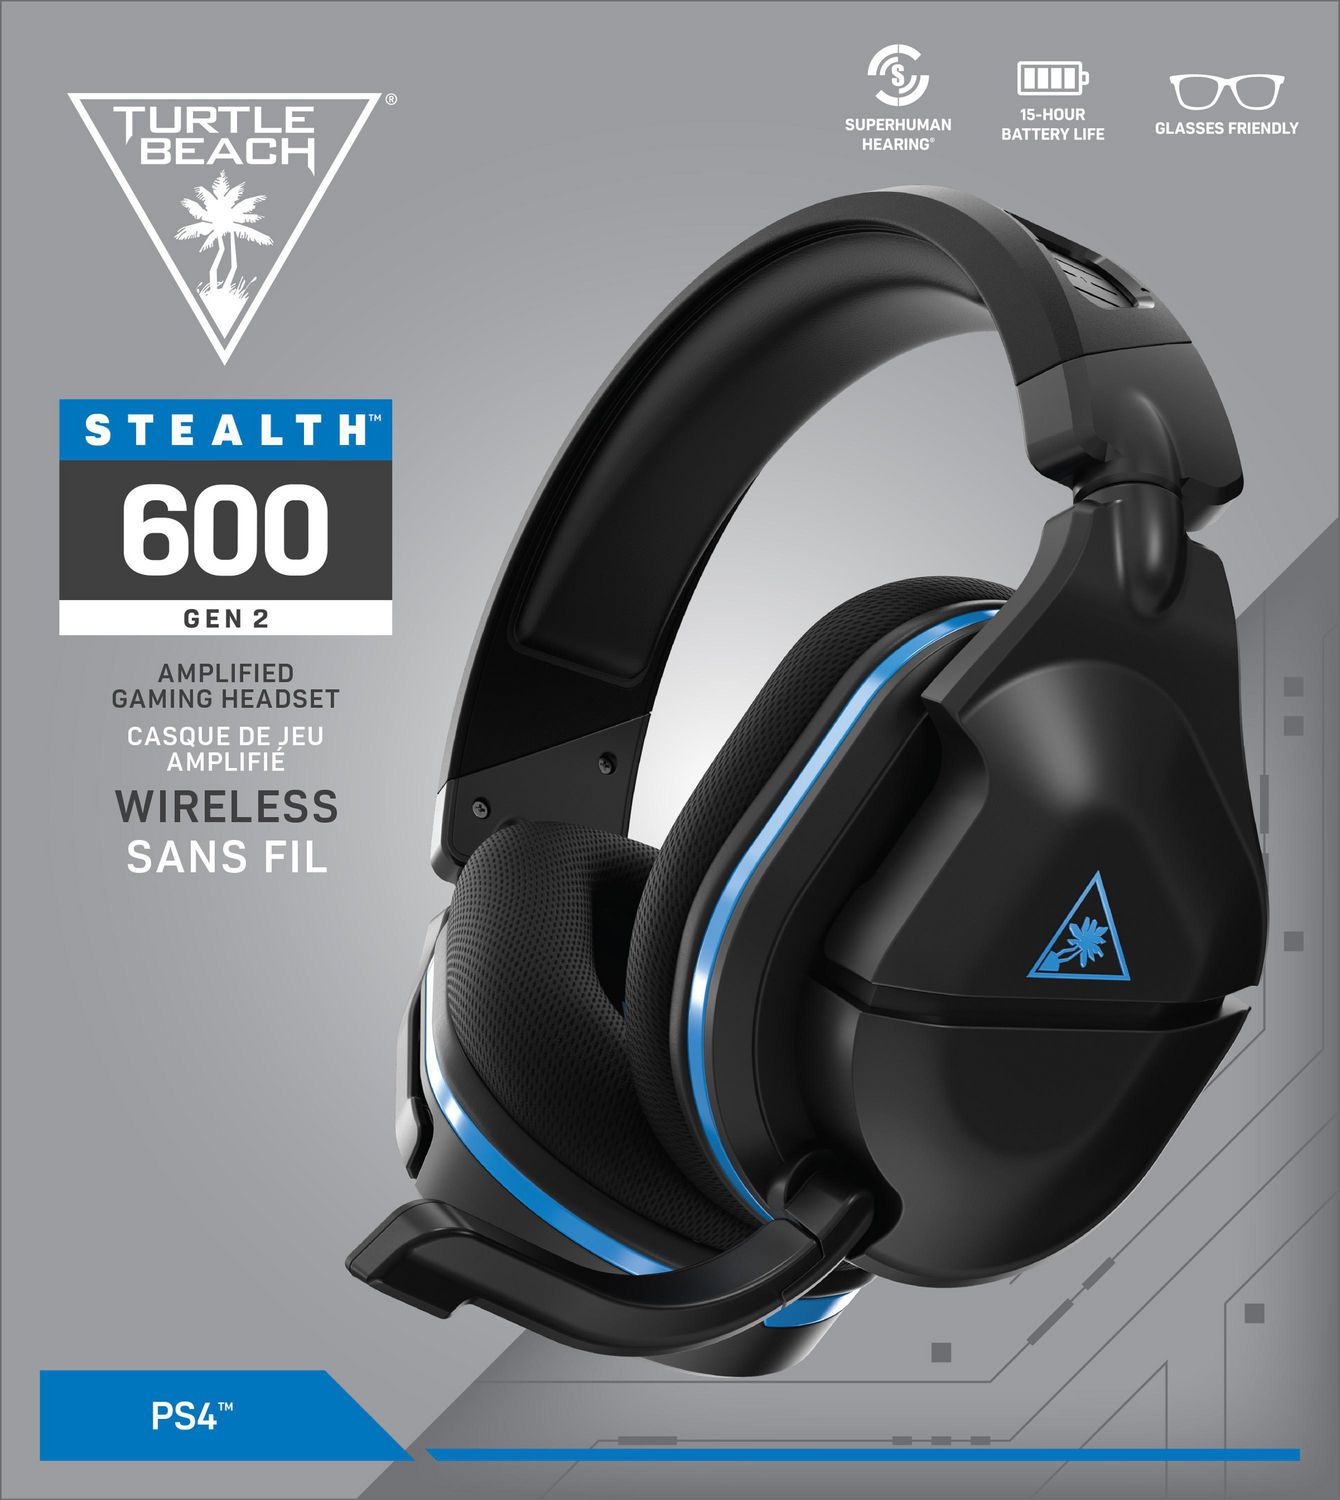 turtle beach stealth 600 ps4 modes